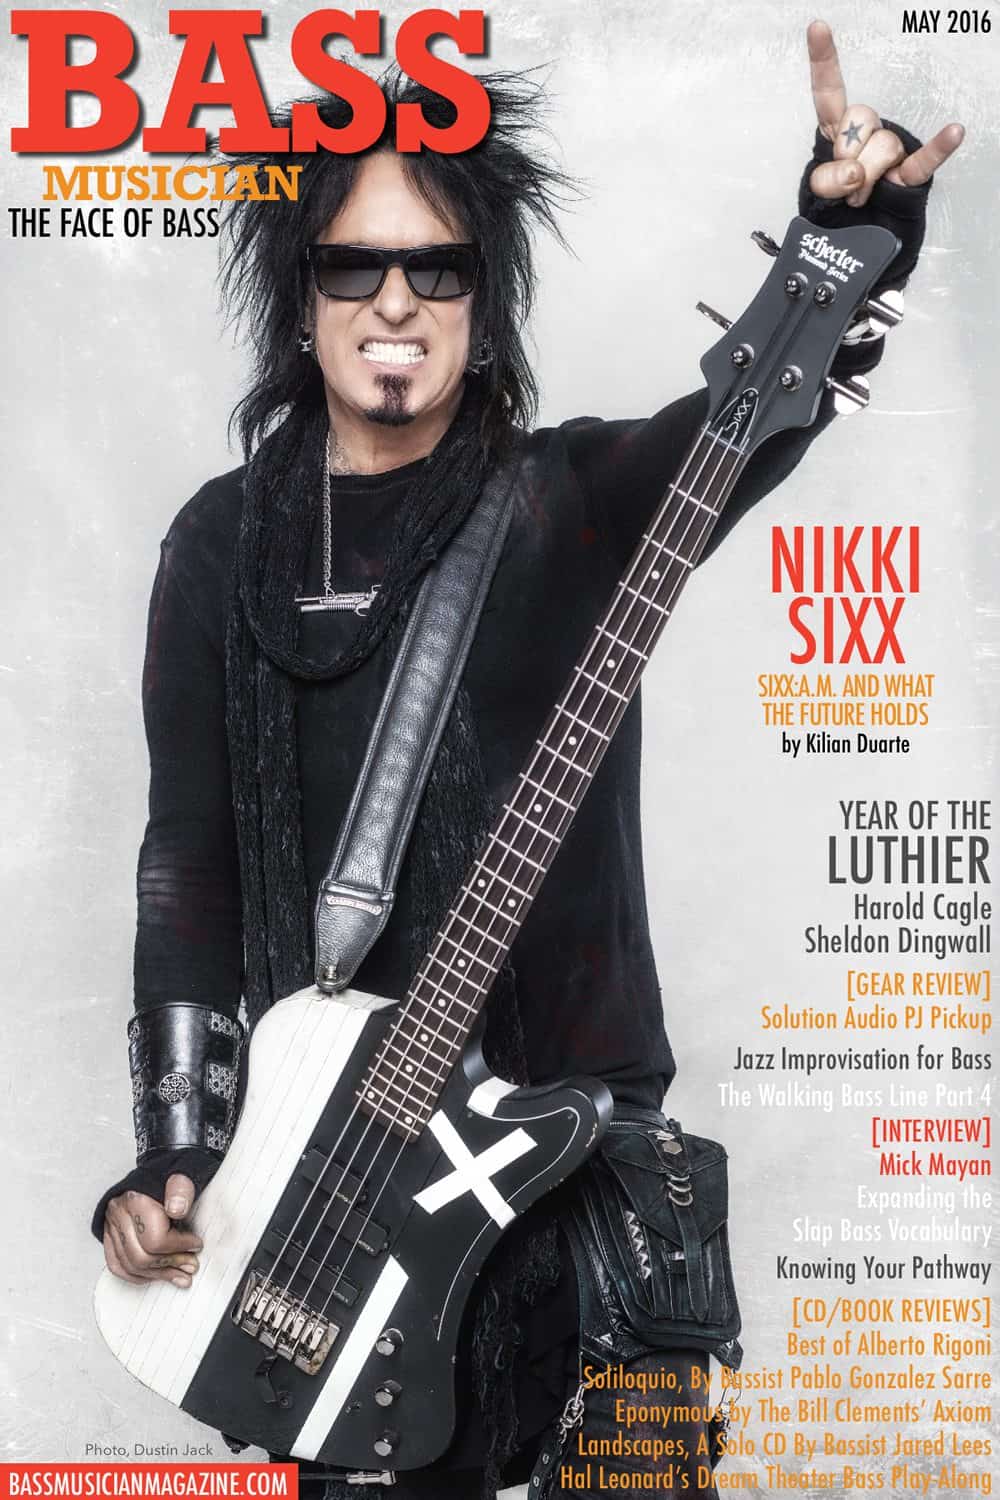 Nikki Sixx, SIXX-A.M. and What the Future Holds – Bass Musician Magazine, May 2016 Issue